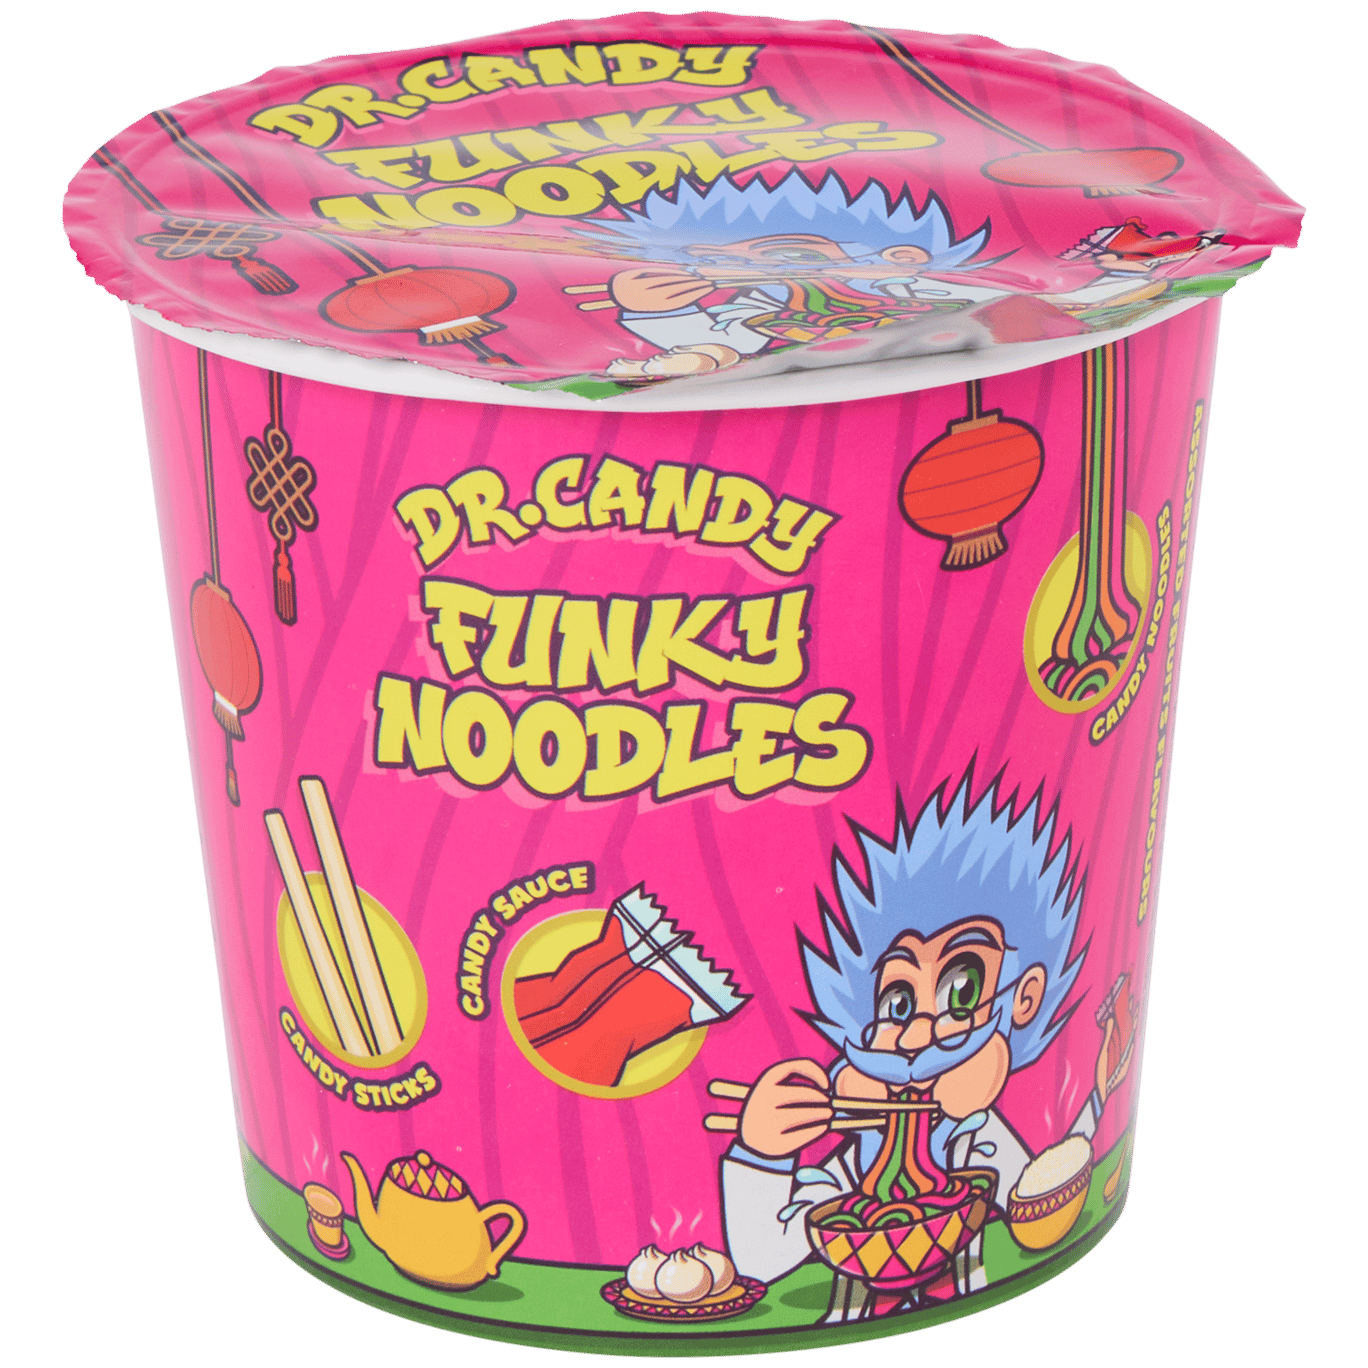 Dr. Candy Funky Noodles